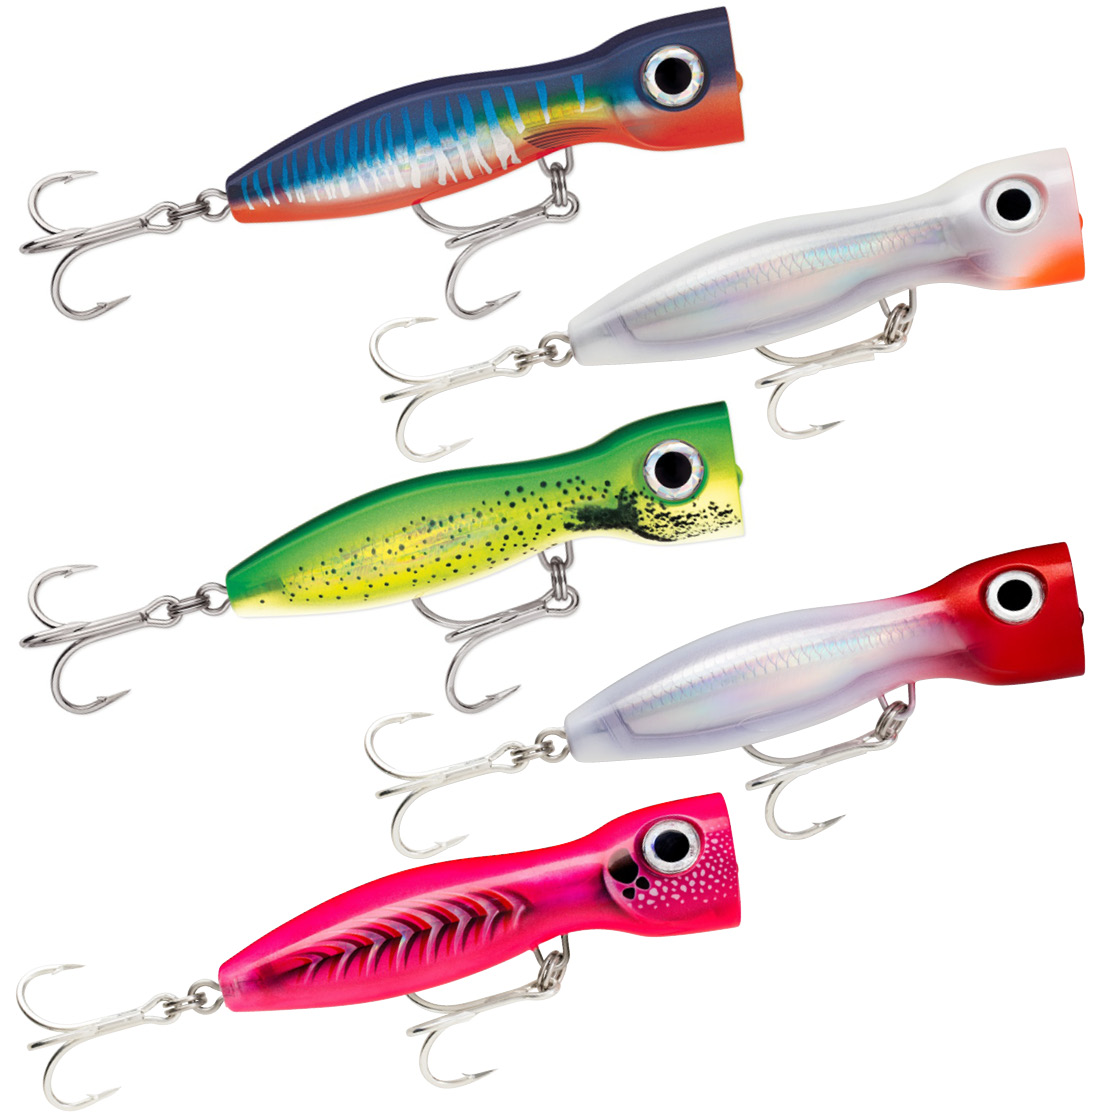 Rapala X Rap Magnum Xplode 13 Cm Popper Topwater Surfacebaits Lures And Baits Spin Fishing Adh Fishing